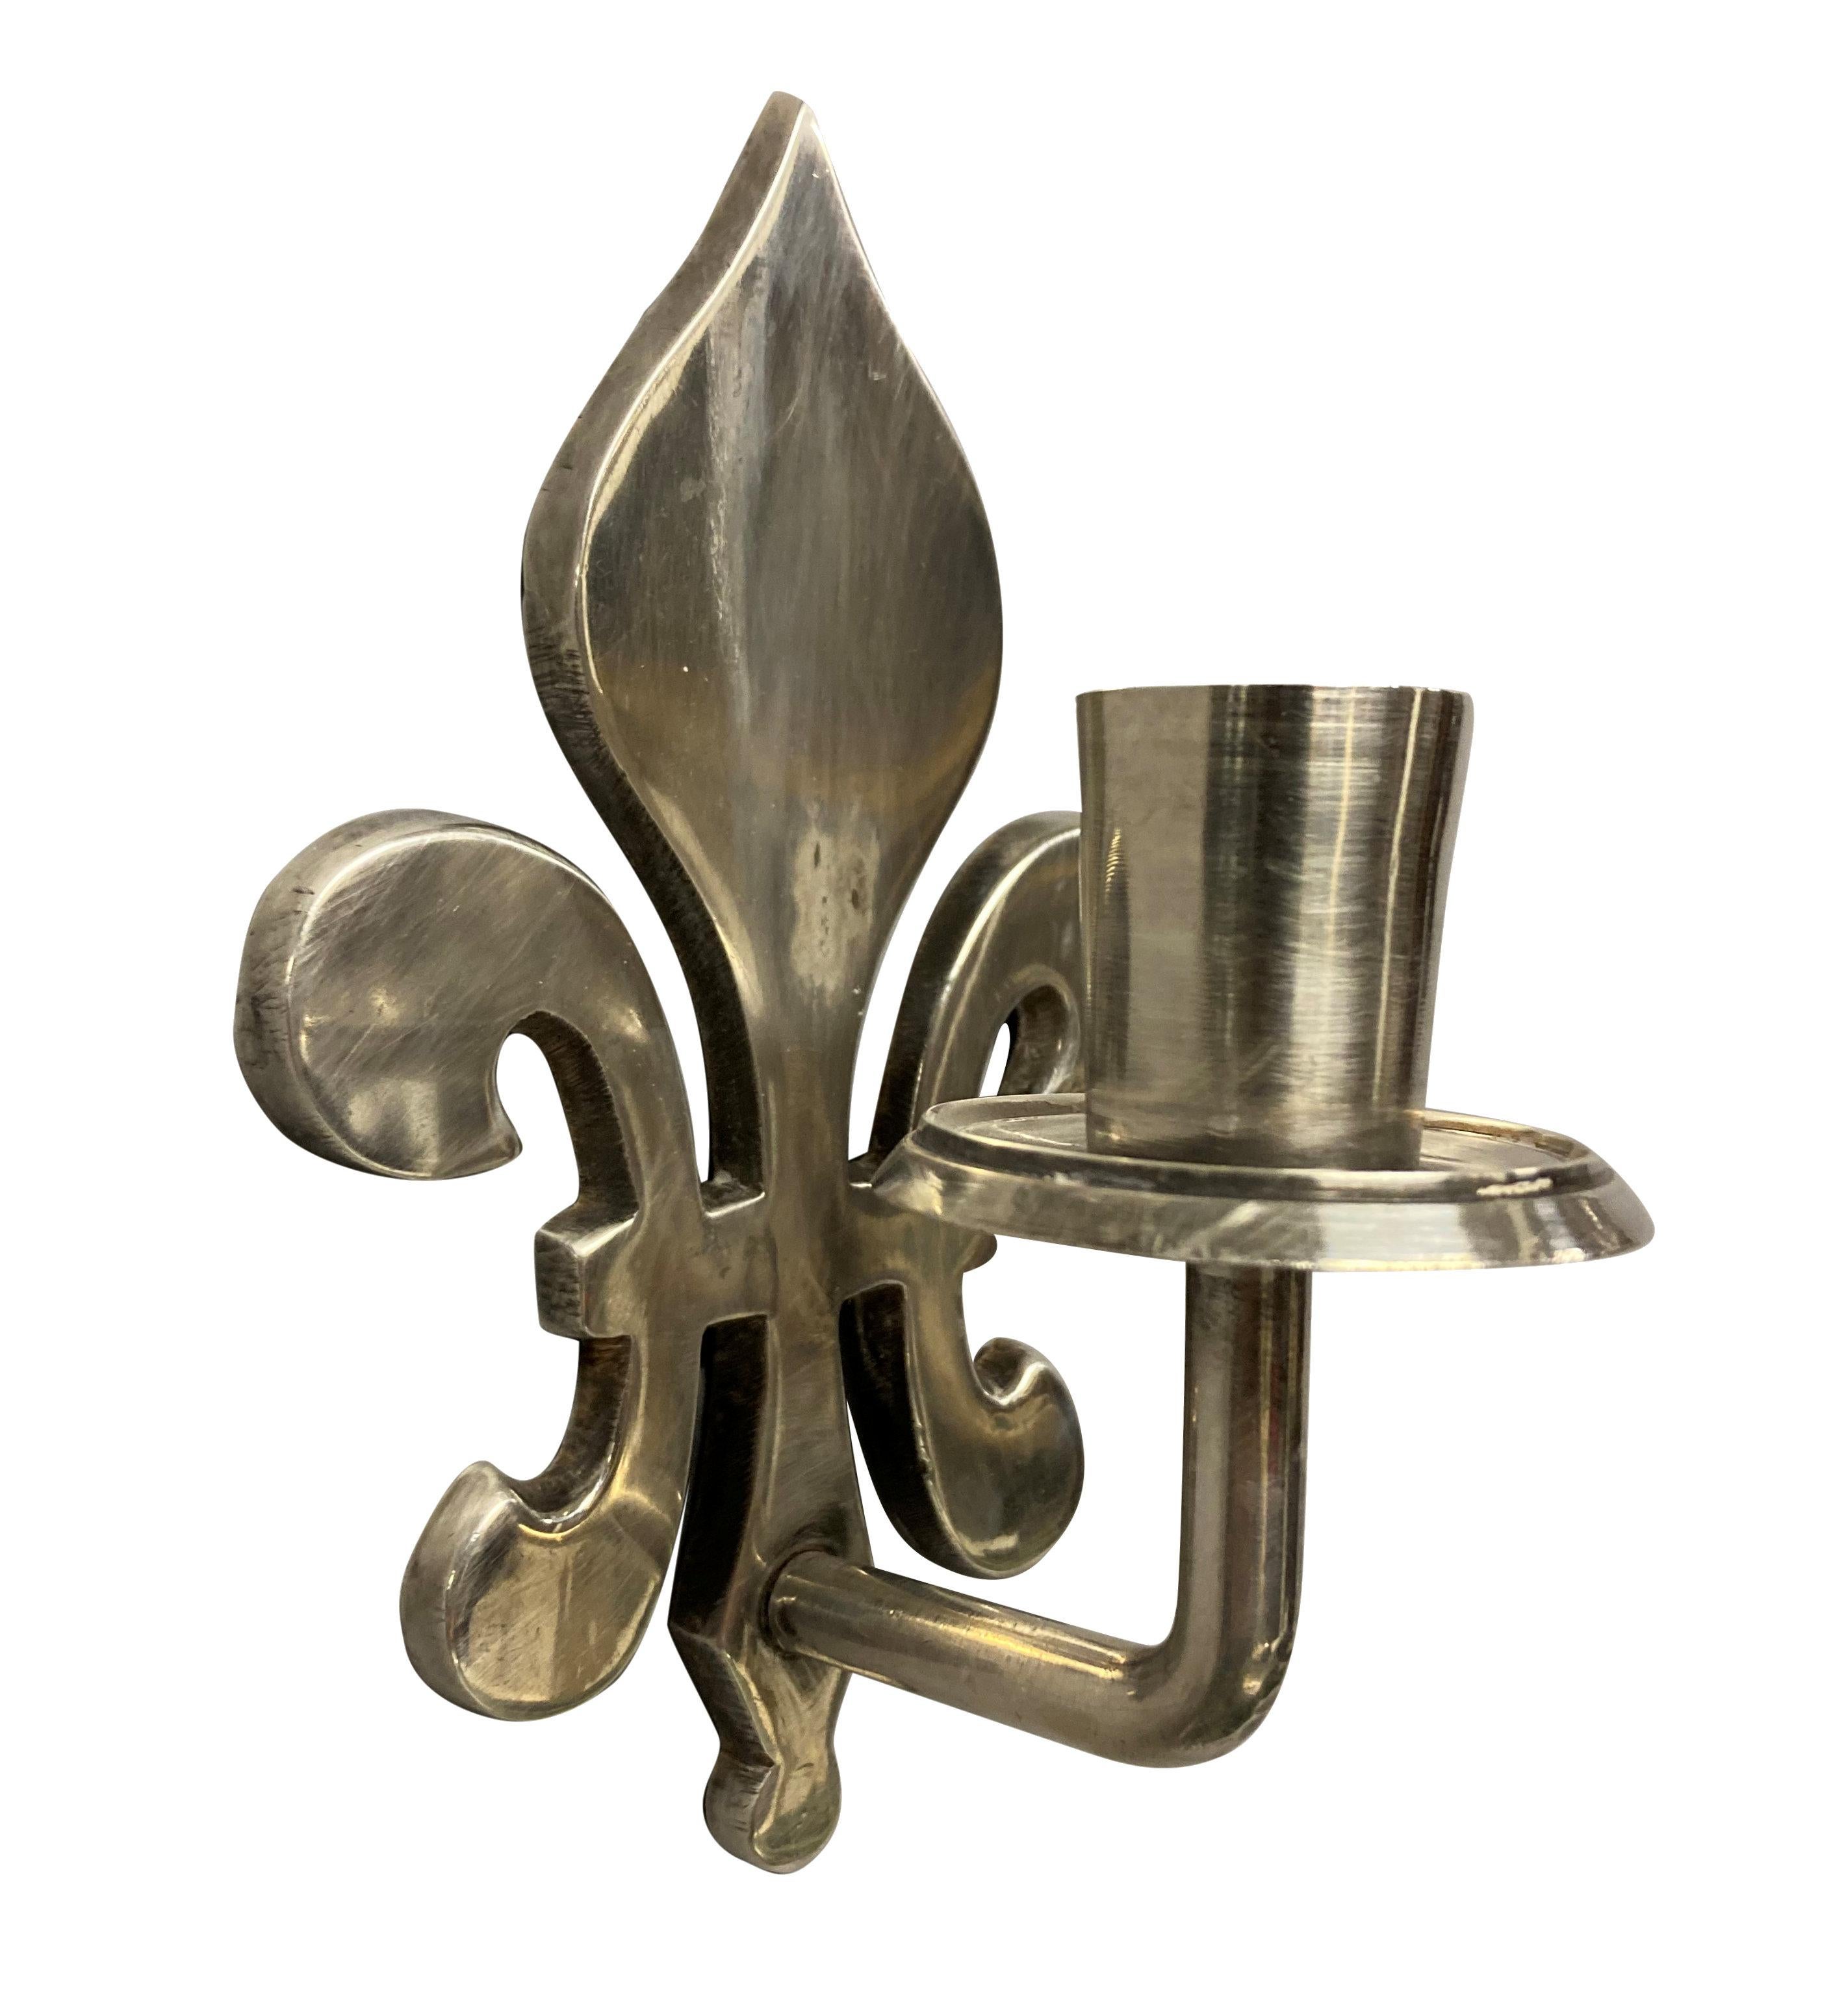 A pair of French silver-plated fleur de lys single arm candle sconces.